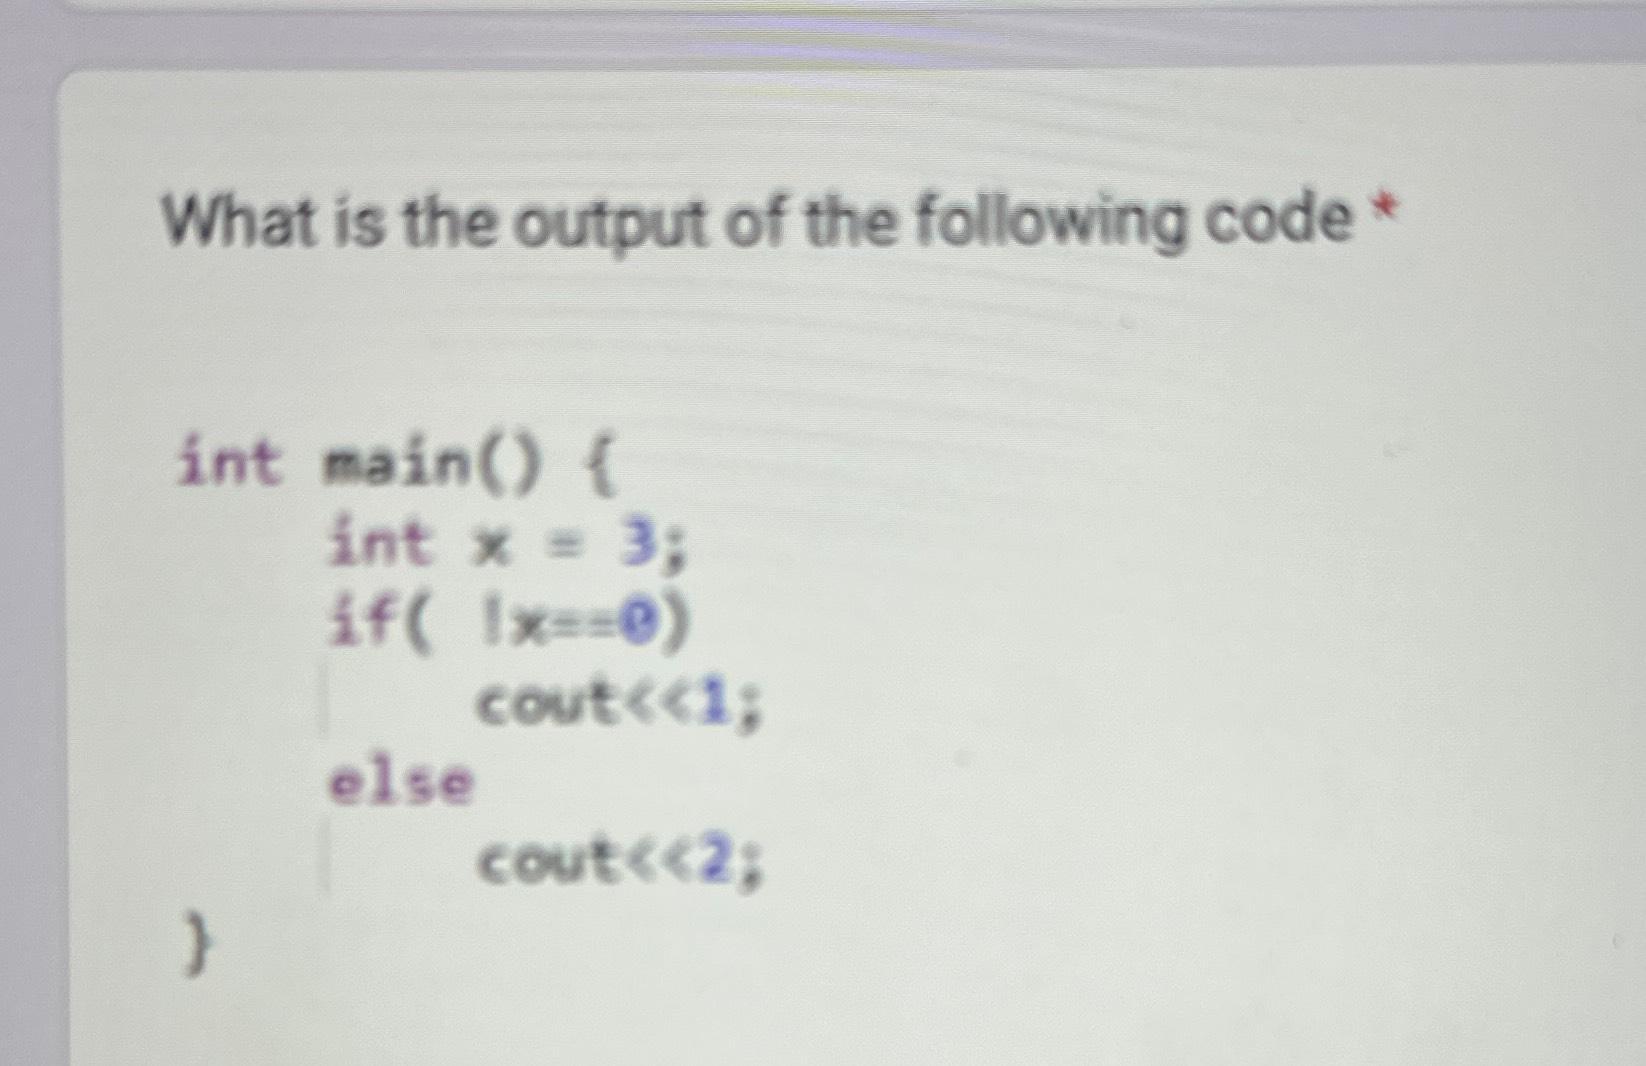 What is the output of the following code * int main() { } int x = 3; if( 1x==0) else cout < <1; cout < <2;